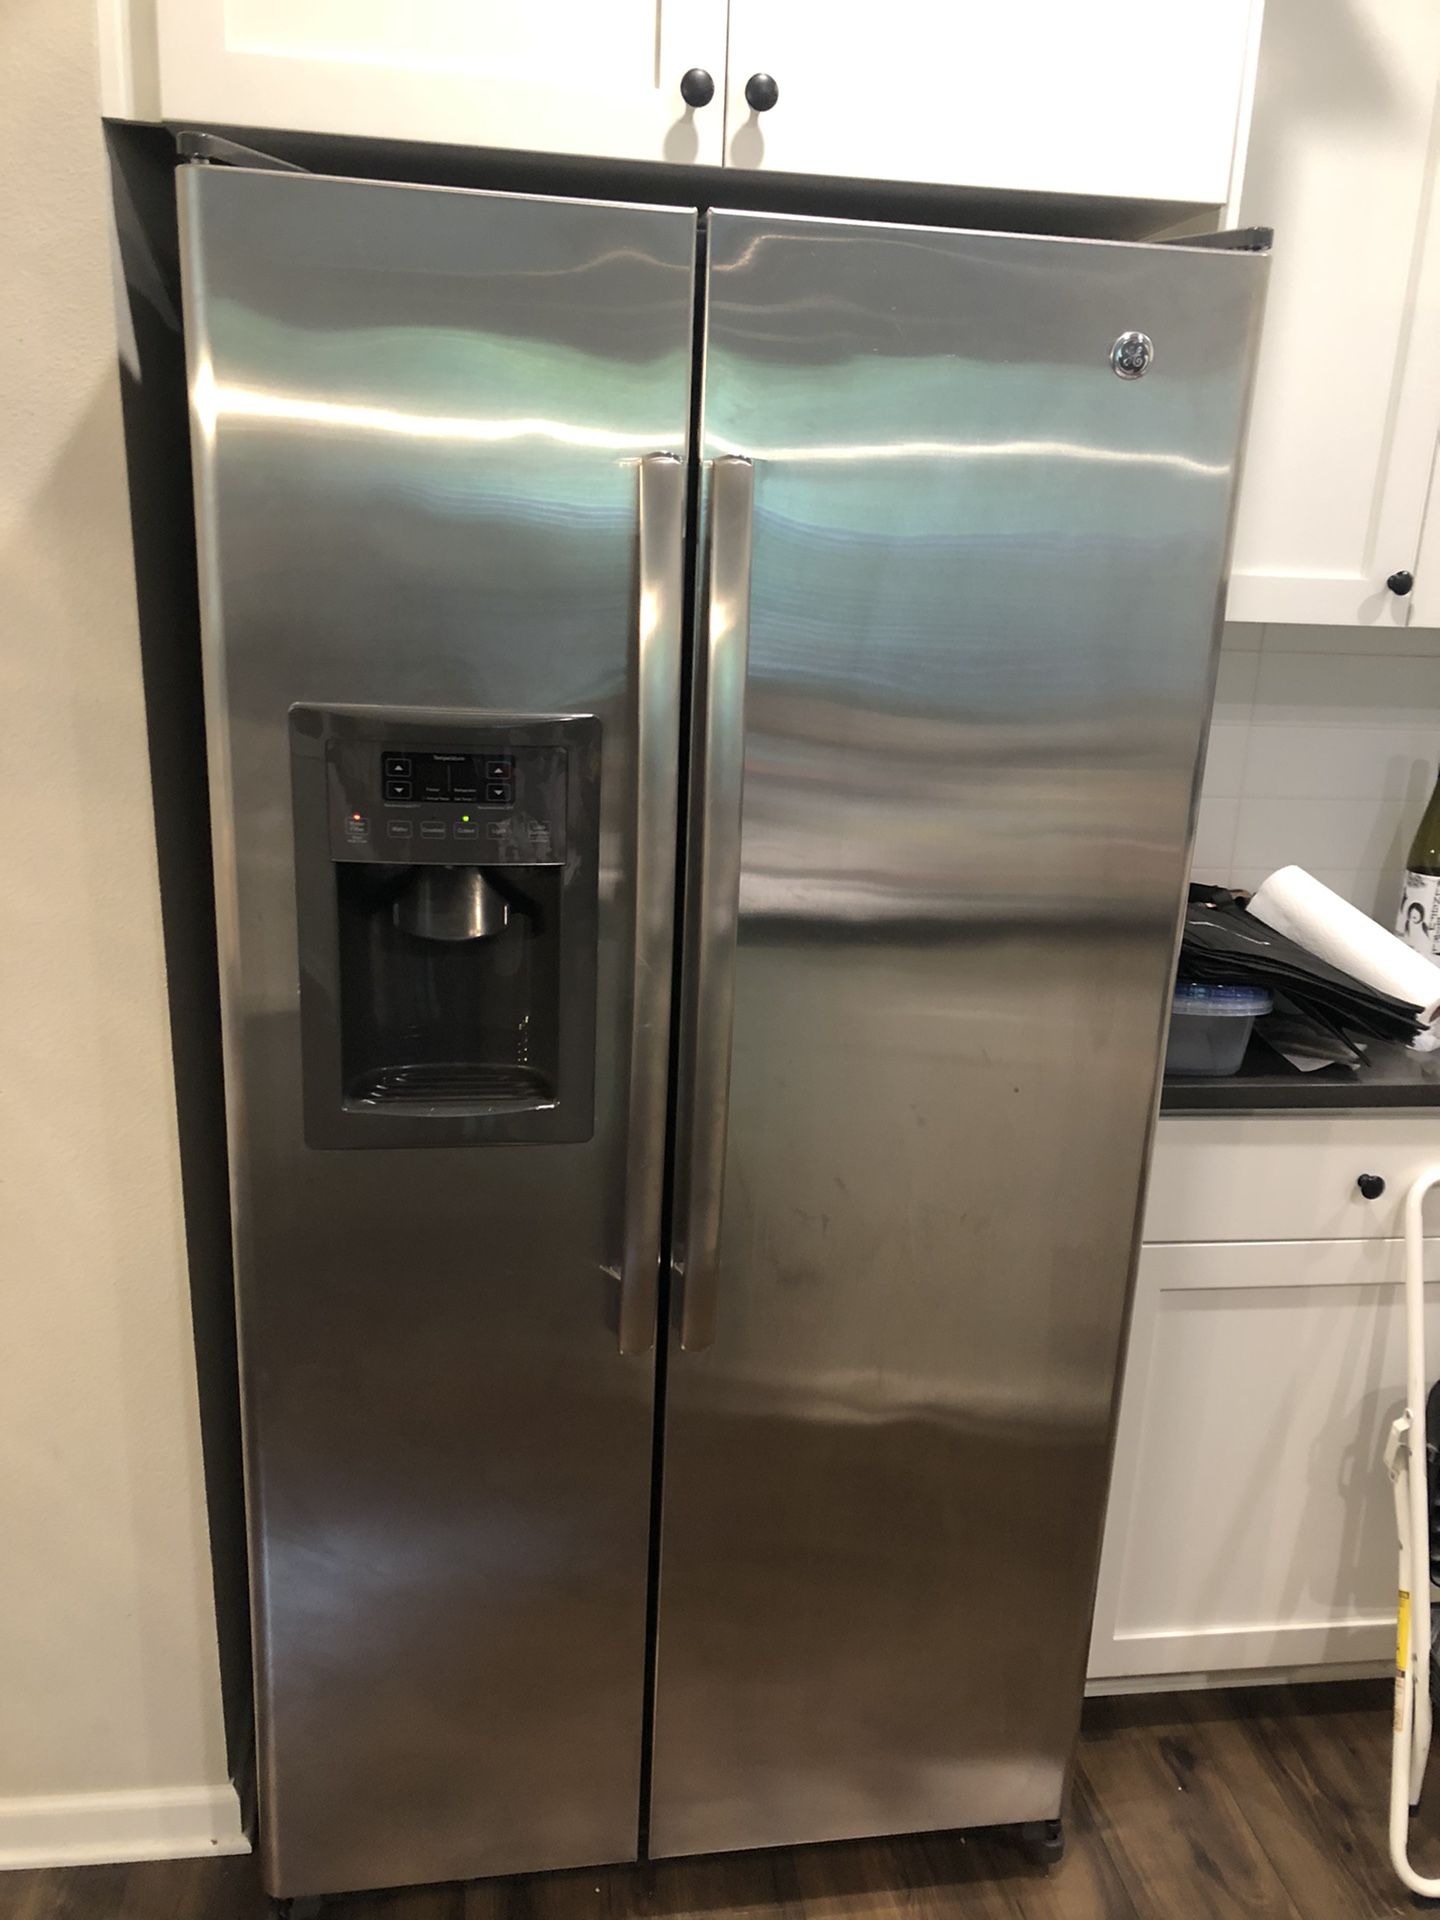 GE SIDE BY SIDE STAINLESS STEEL REFRIGERATOR 